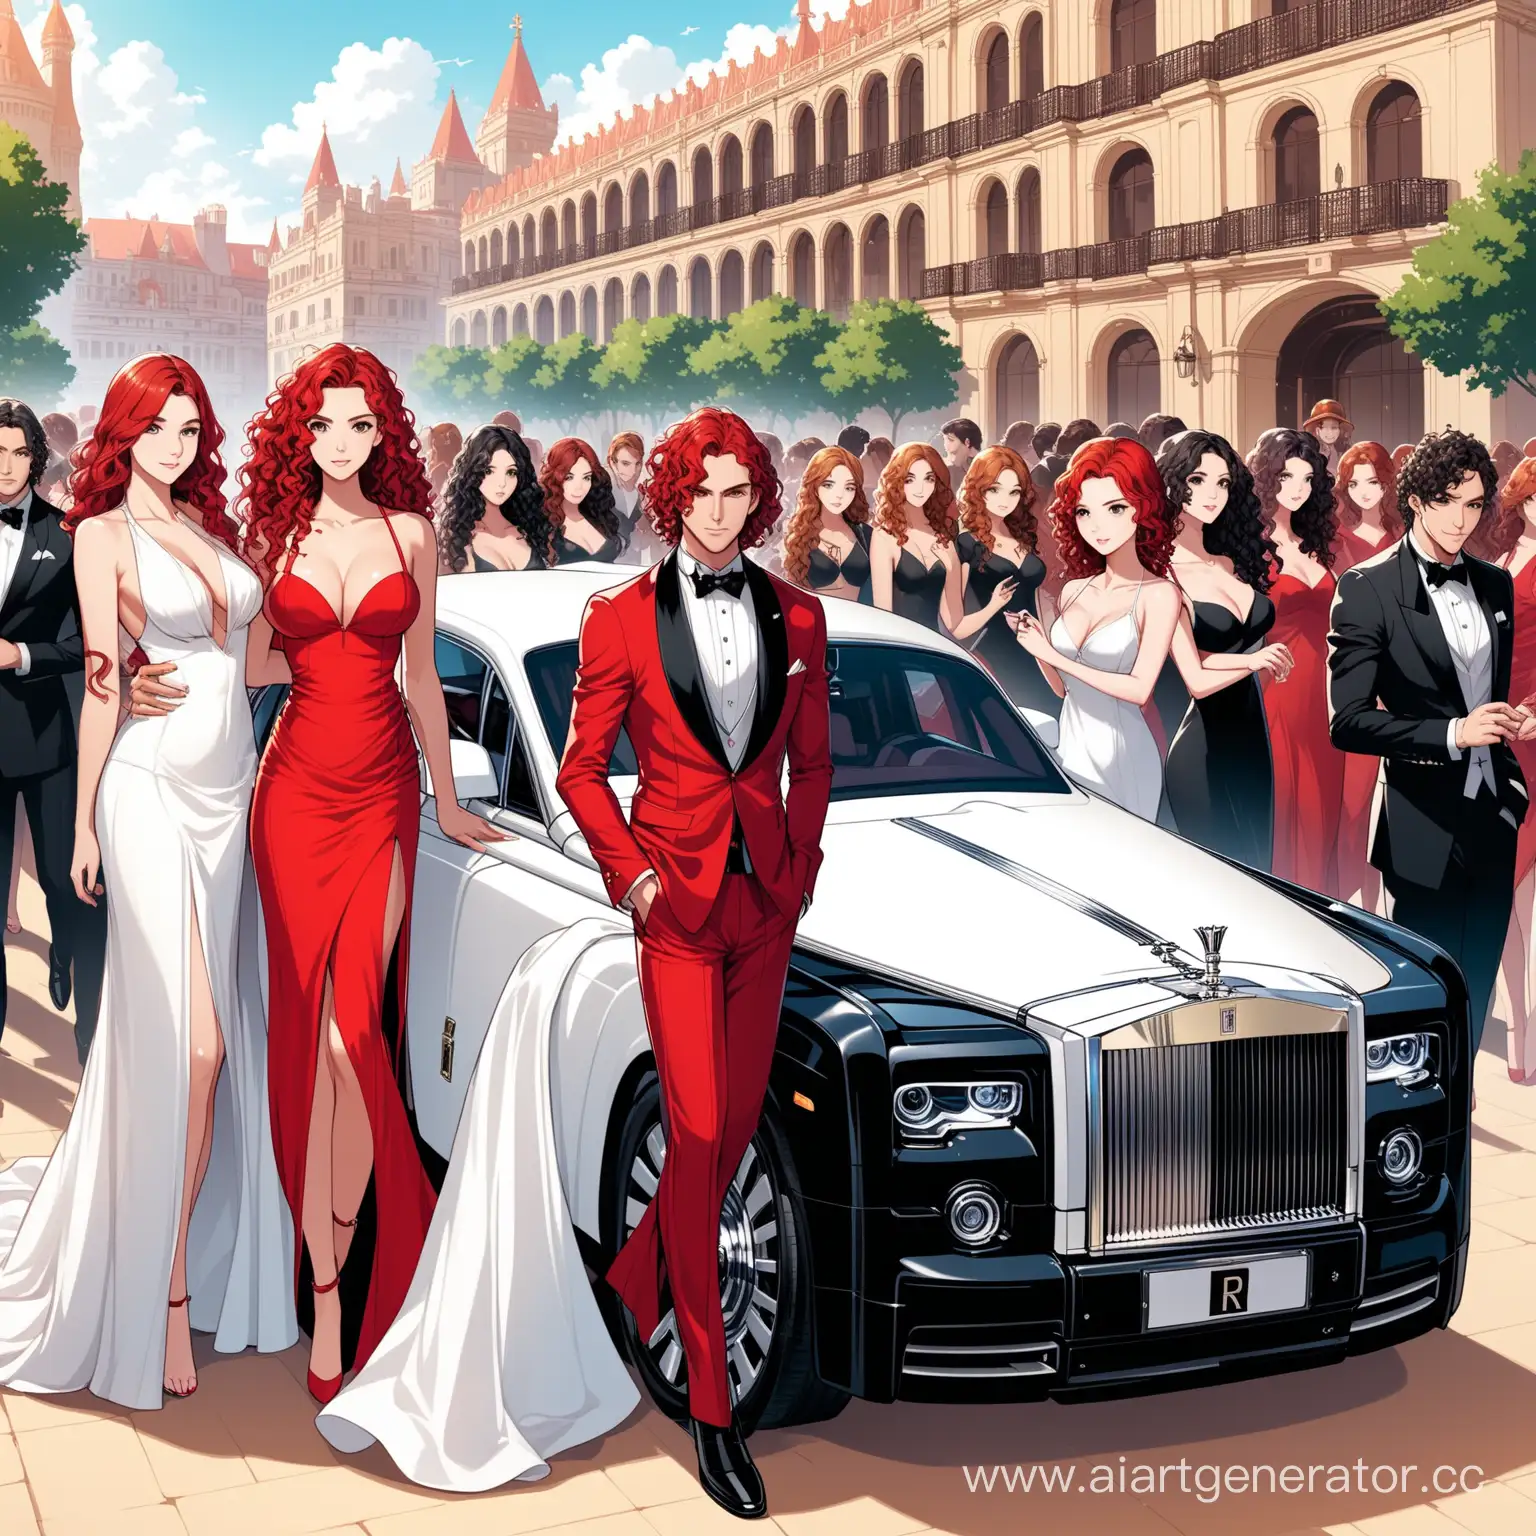 draw a cover where there is a curly-haired guy in white clothes in the middle, there is a rolls Royce phantom in the back, there are many girls in black and red clothes behind the curly-haired guy